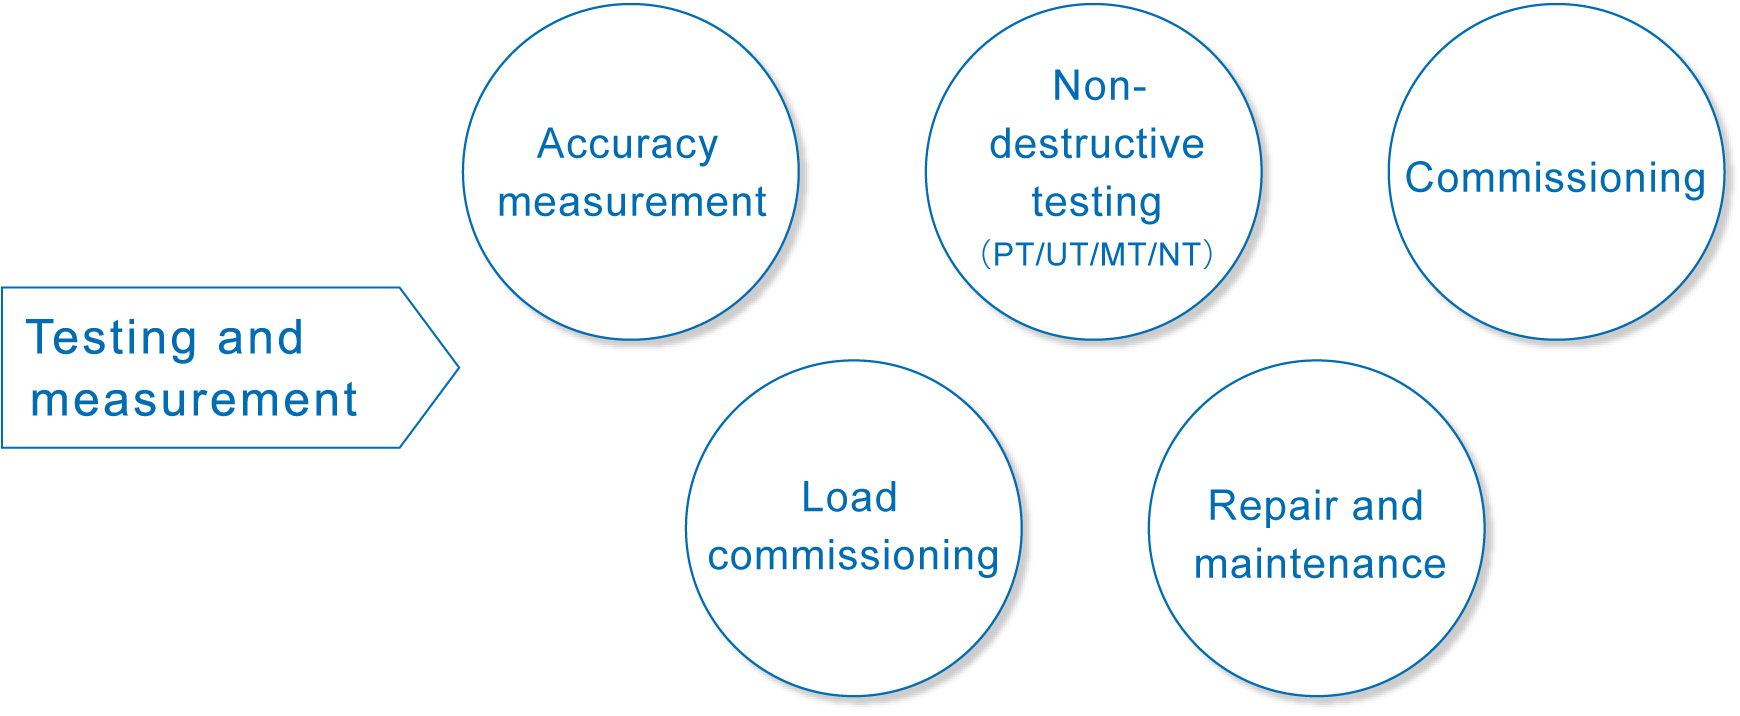 Testing and measurement,Accuracy measurement / Non-destructive testing(PT/UT/MT/NT)  / Commissioning / Load commissioning / Repair and maintenance